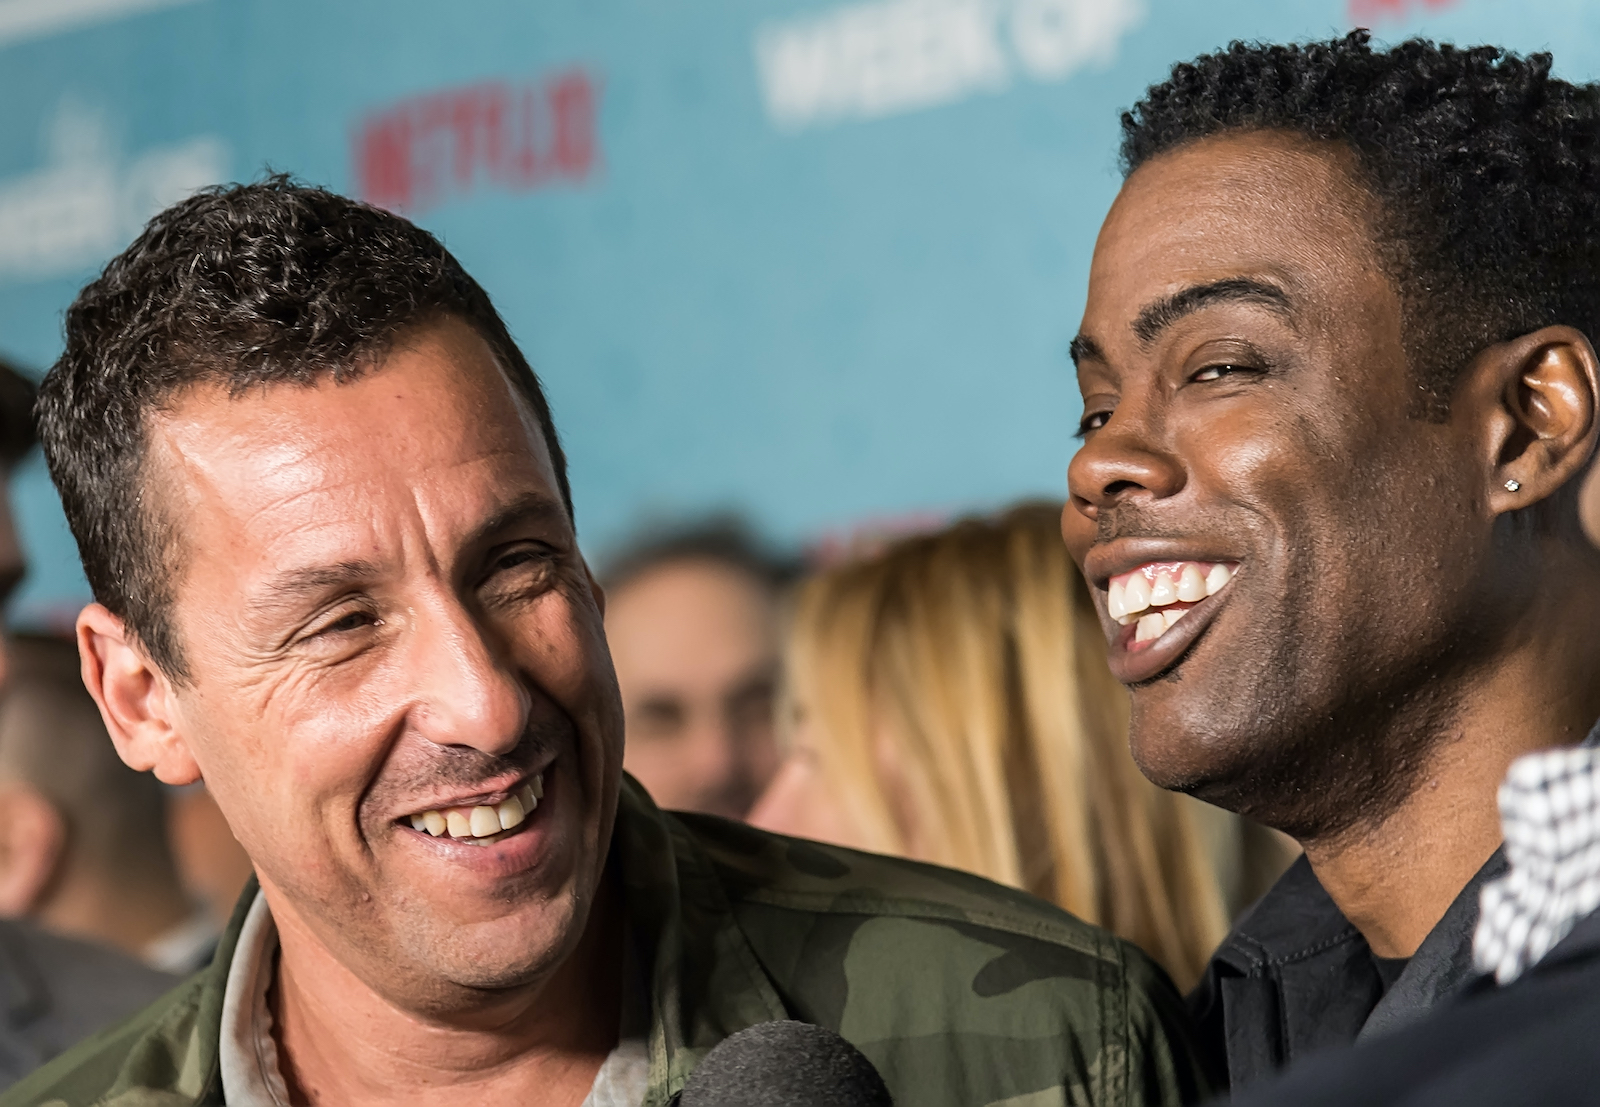 Adam Sandler and Chris Rock laugh together during a movie premiere